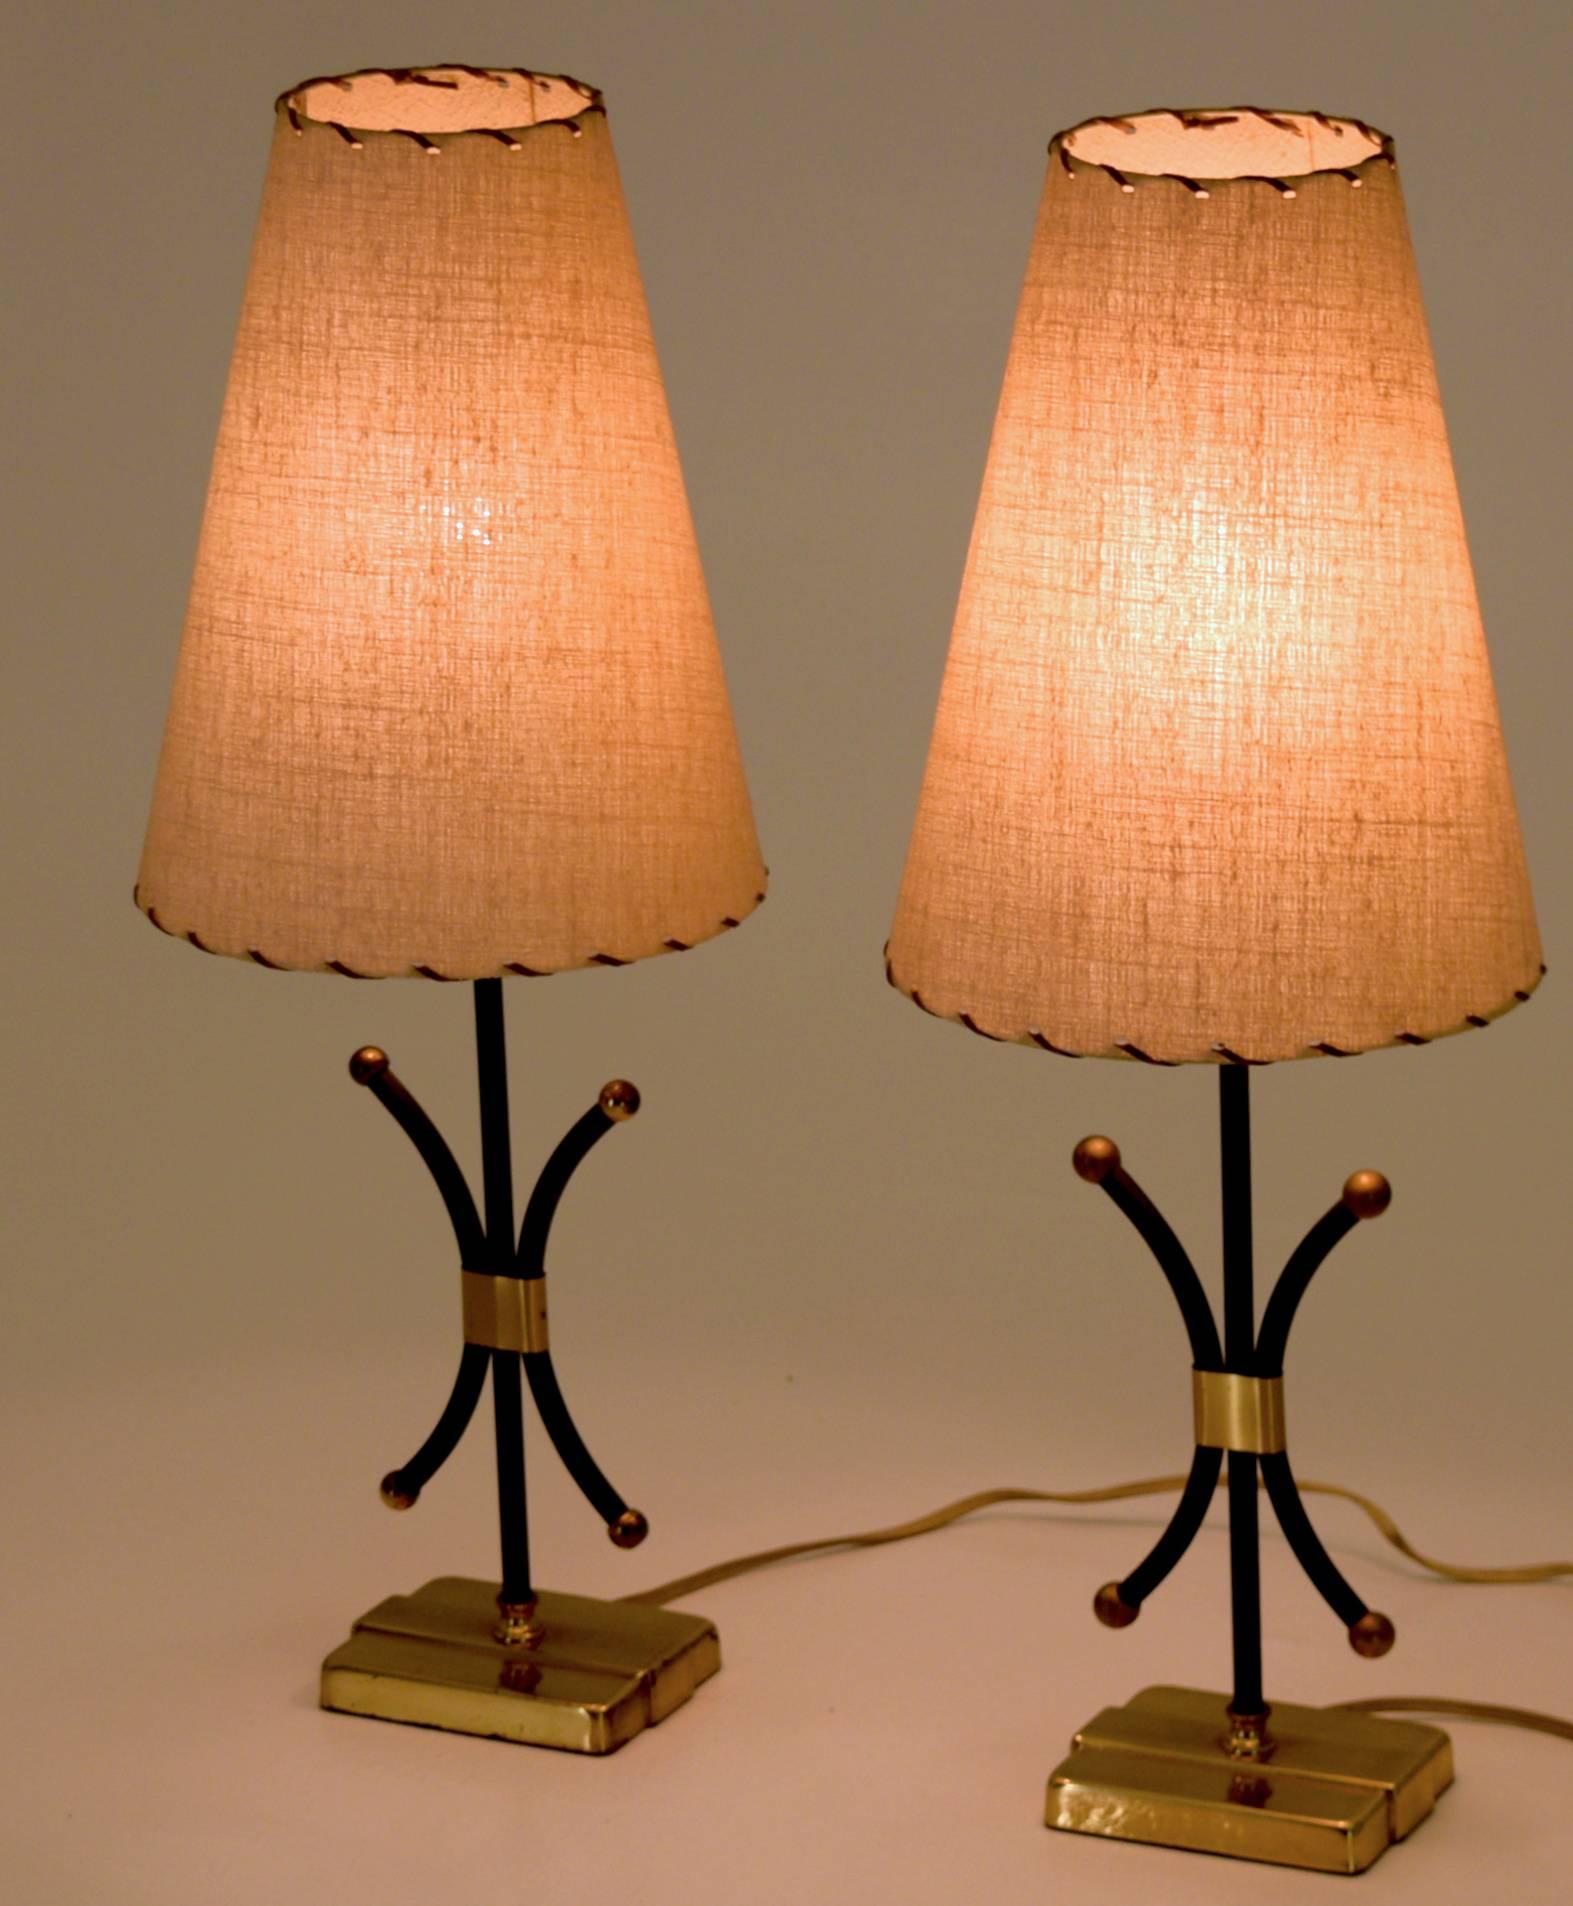 Fleur-De-Lis motif 
Likely Produced in France
circa 1950
Eight round and 22 inches tall.

A fine pair of minimalist boudoir style petite lamps with linen shades with leather strapping. The lamps are produced with brass accents and knobs and bases